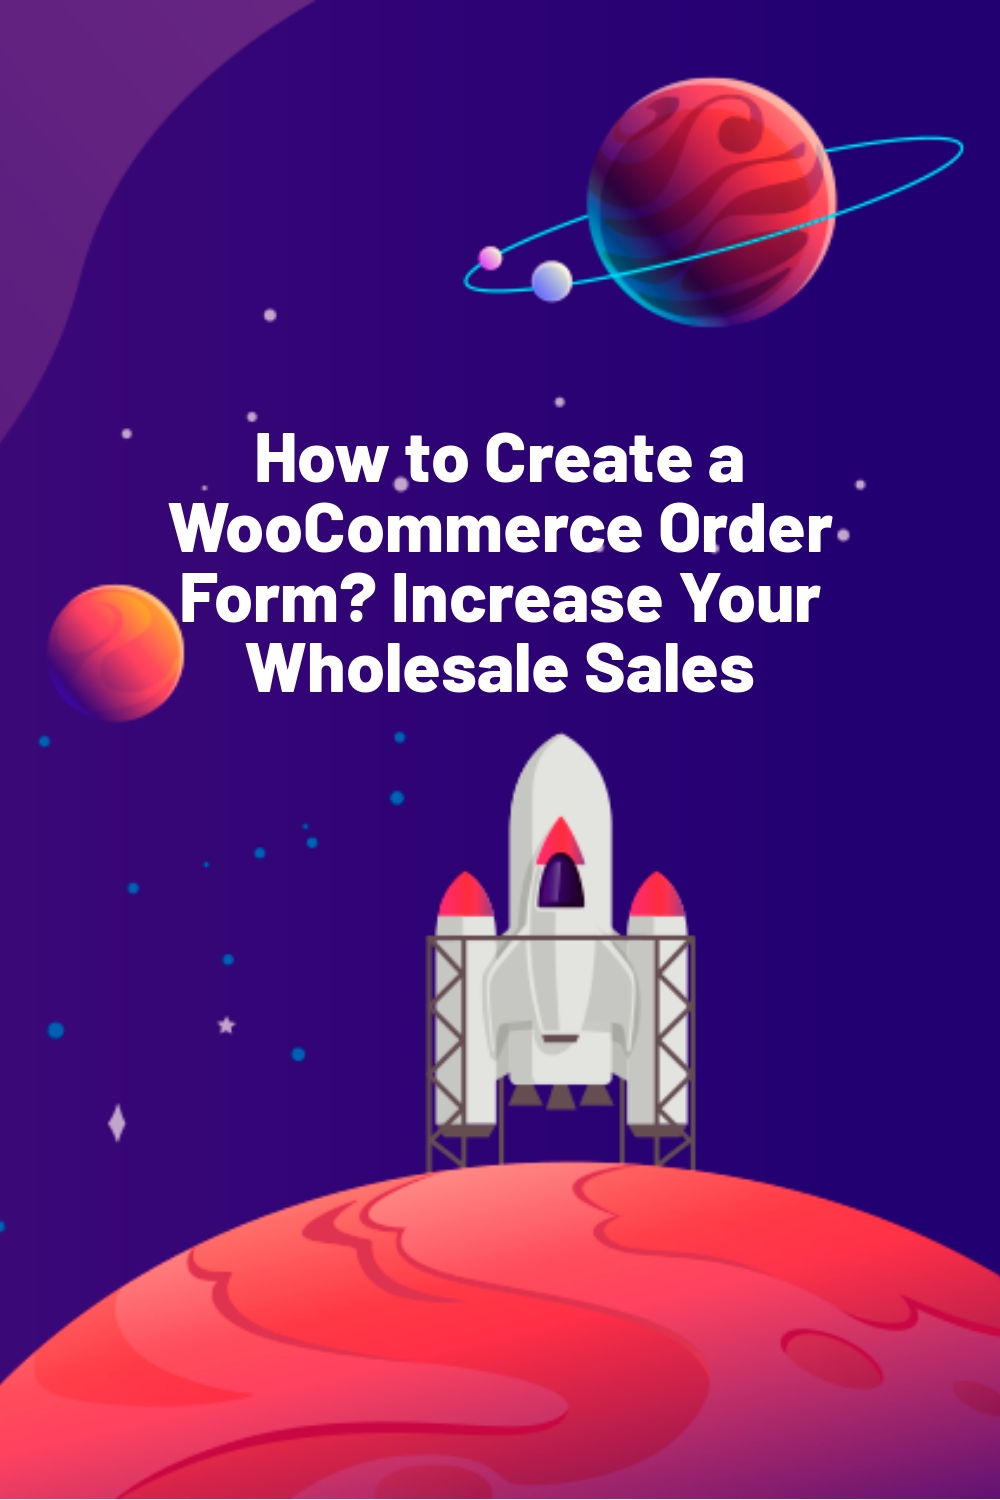 How to Create a WooCommerce Order Form? Increase Your Wholesale Sales